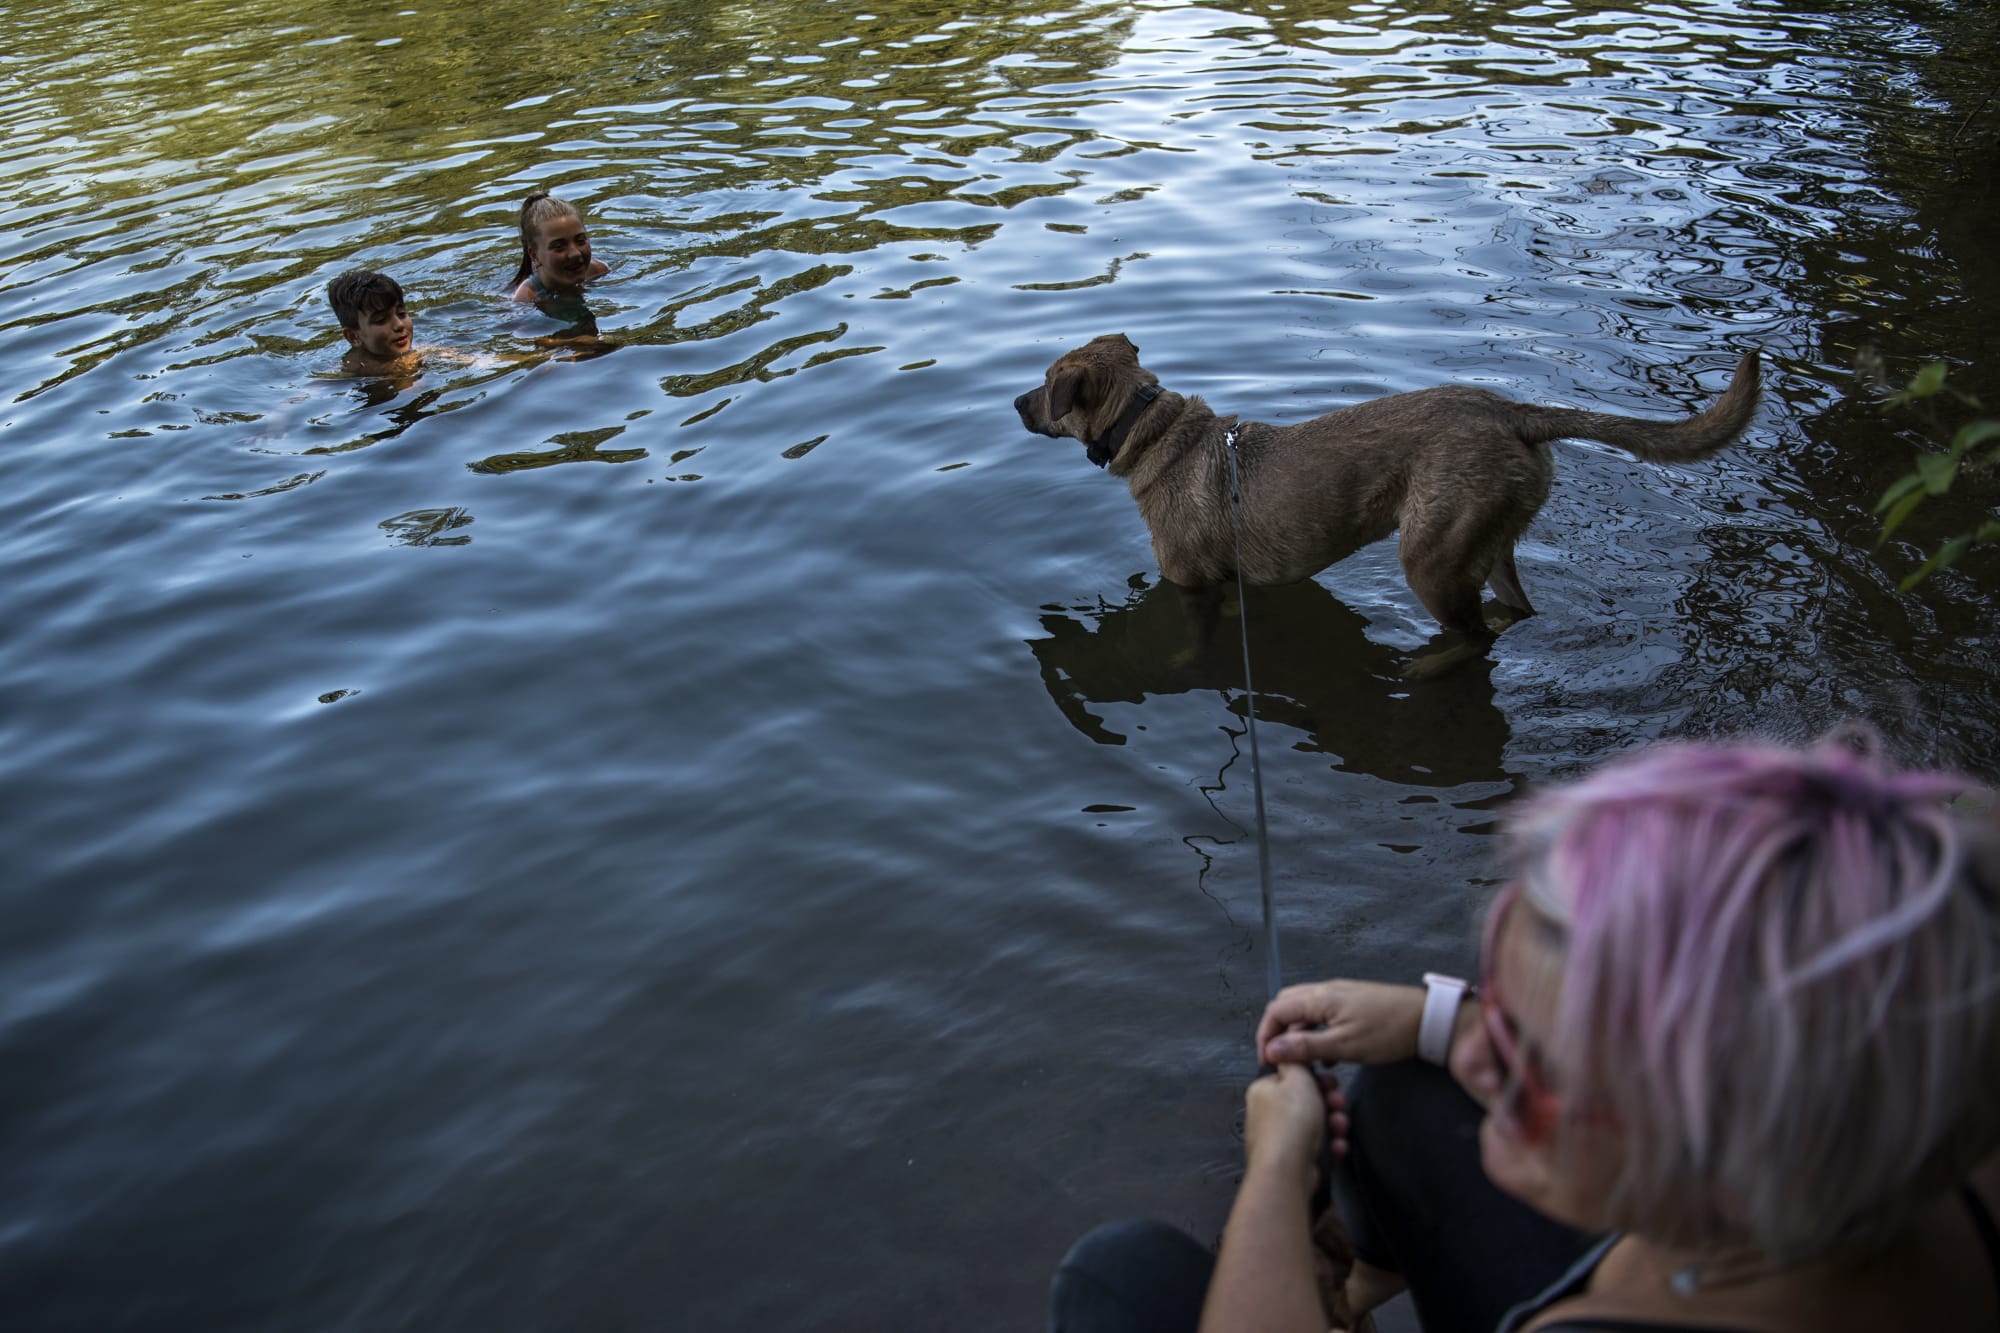 Cameron Gamby, 11, left, and his sister Makena, 12, encourage their dog Ranger to jump in the water as they play by the shore at Lacamas Lake with their mother Kristin, all of Vancouver, earlier this month in Camas. The next several days will again see area residents looking to beat the heat as high temperatures continue to reach the 90s.